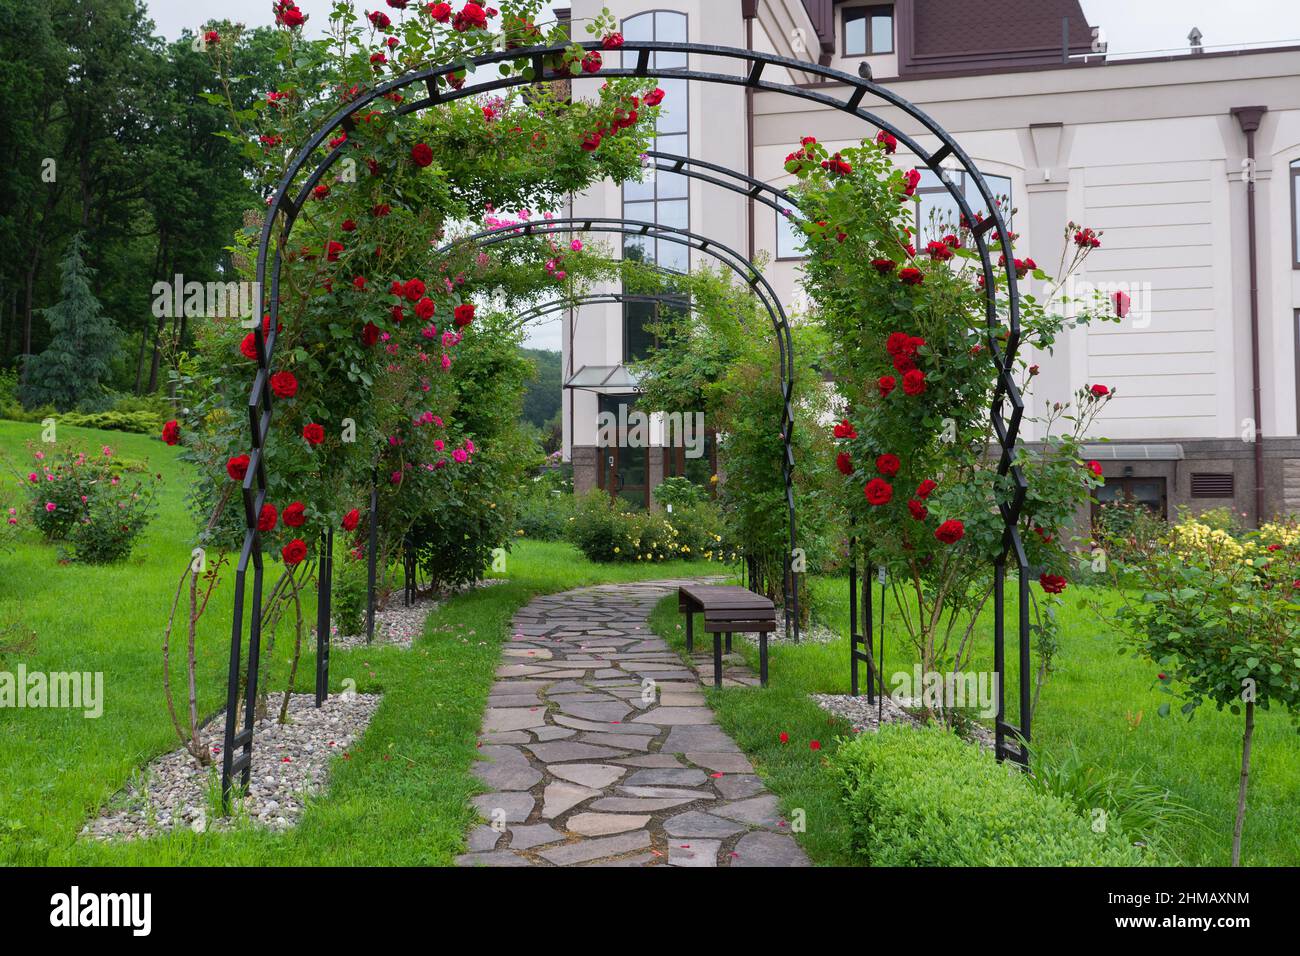 Landscape design. Trees, bushes, green lawns. Flower arch with red roses. Beautiful park near the green forest Stock Photo